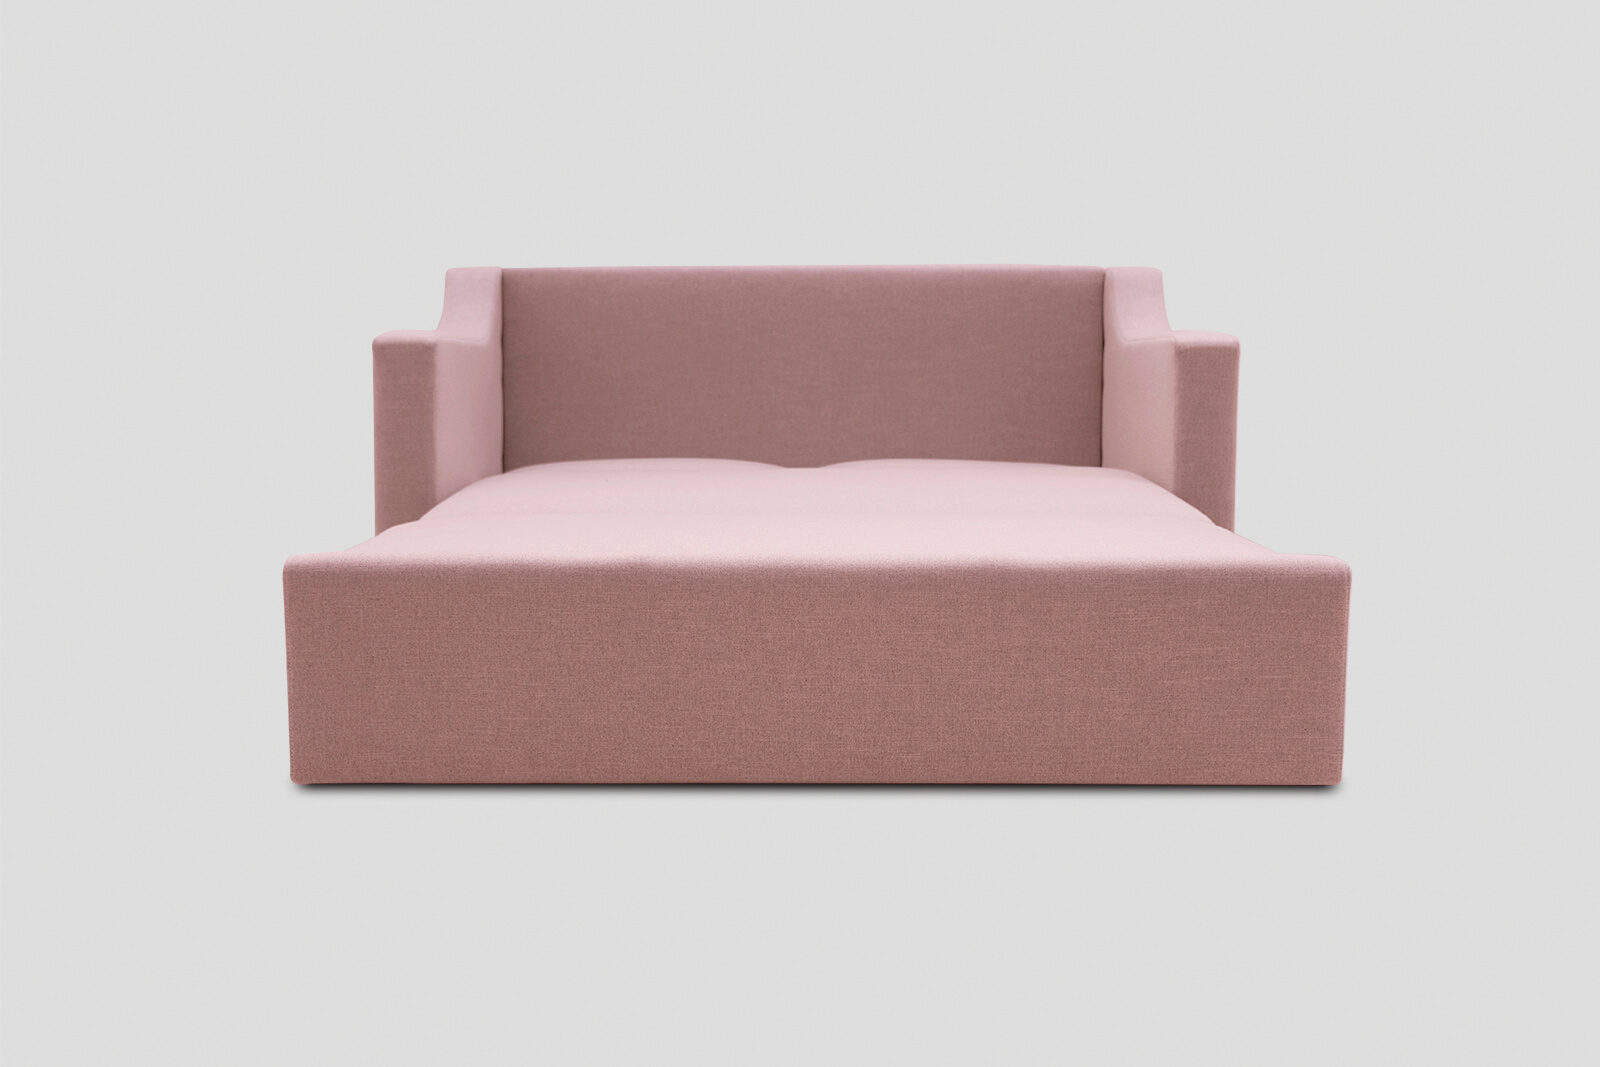 HBSB02-double-sofa-bed-rosewater-front-bed